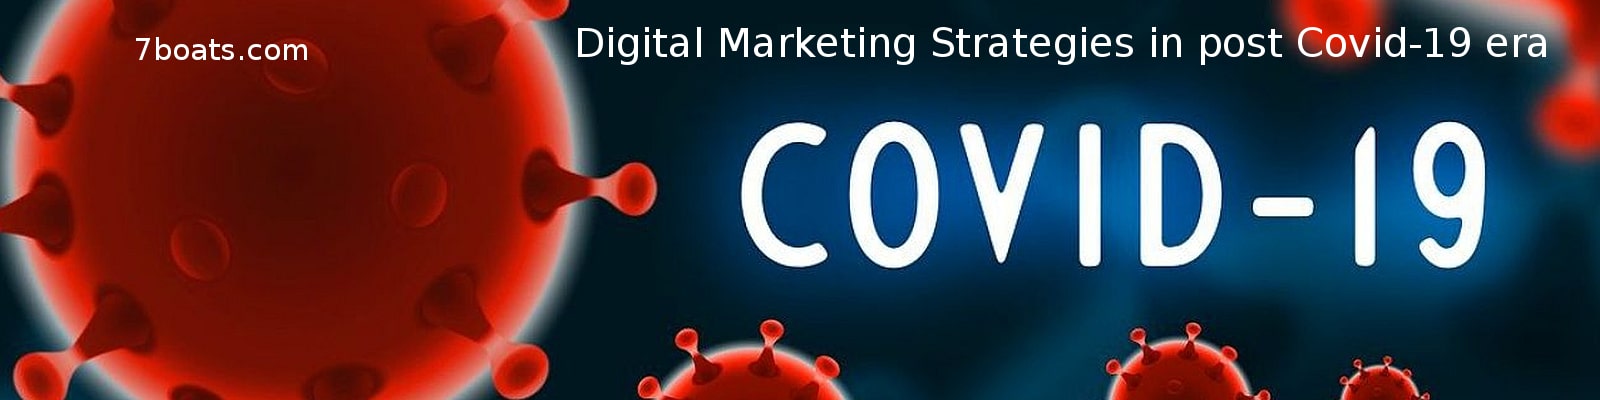 Decoding the right digital marketing strategies in post Covid-19 period in India